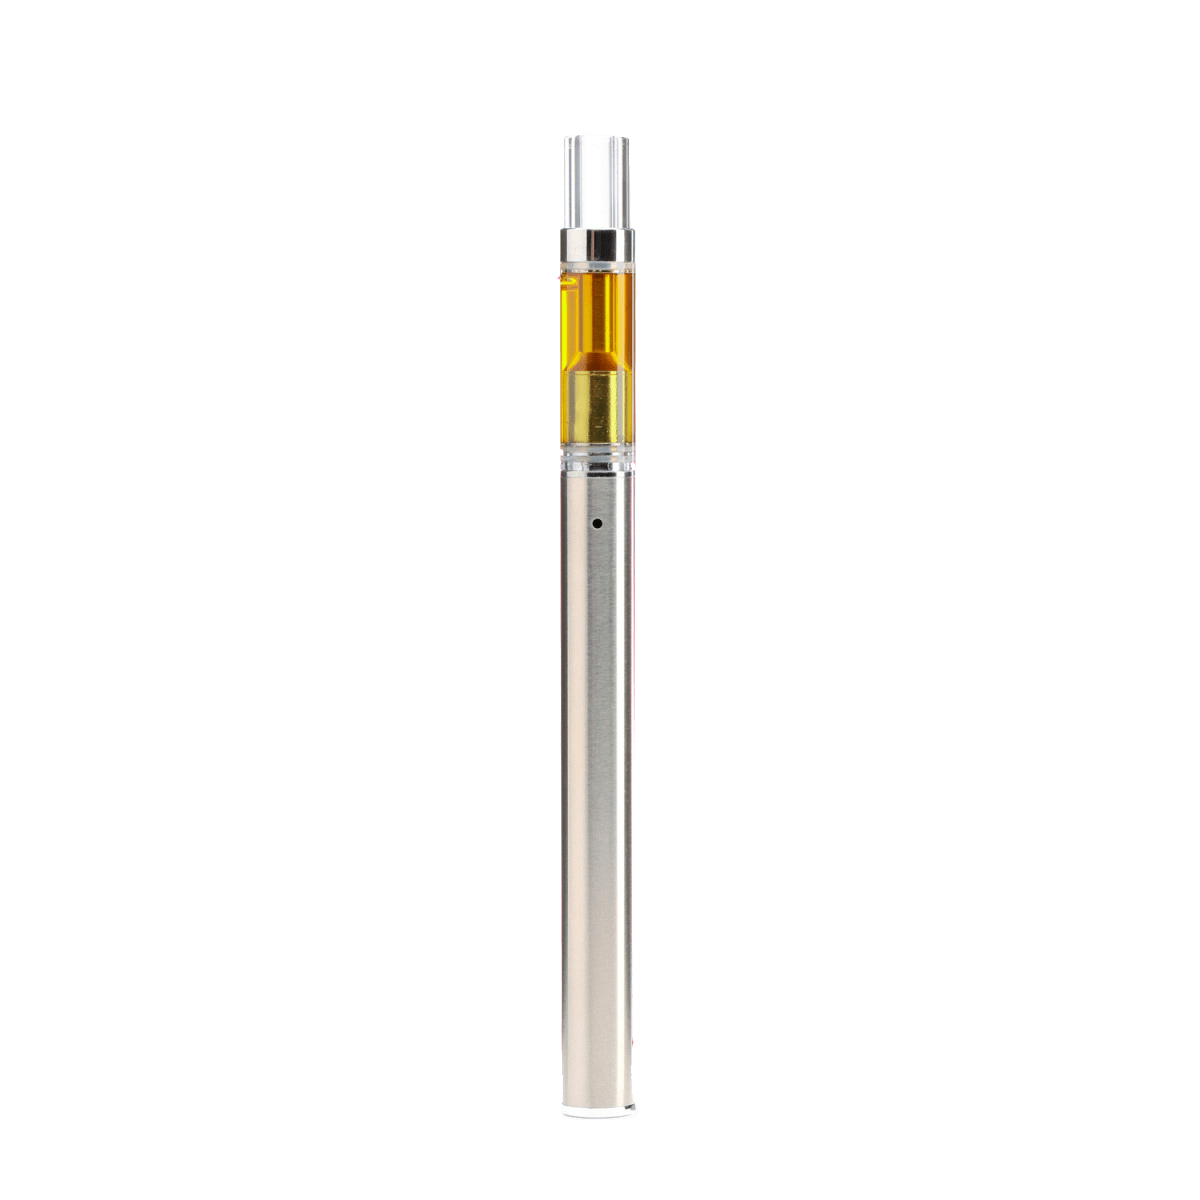 Connection between vaping